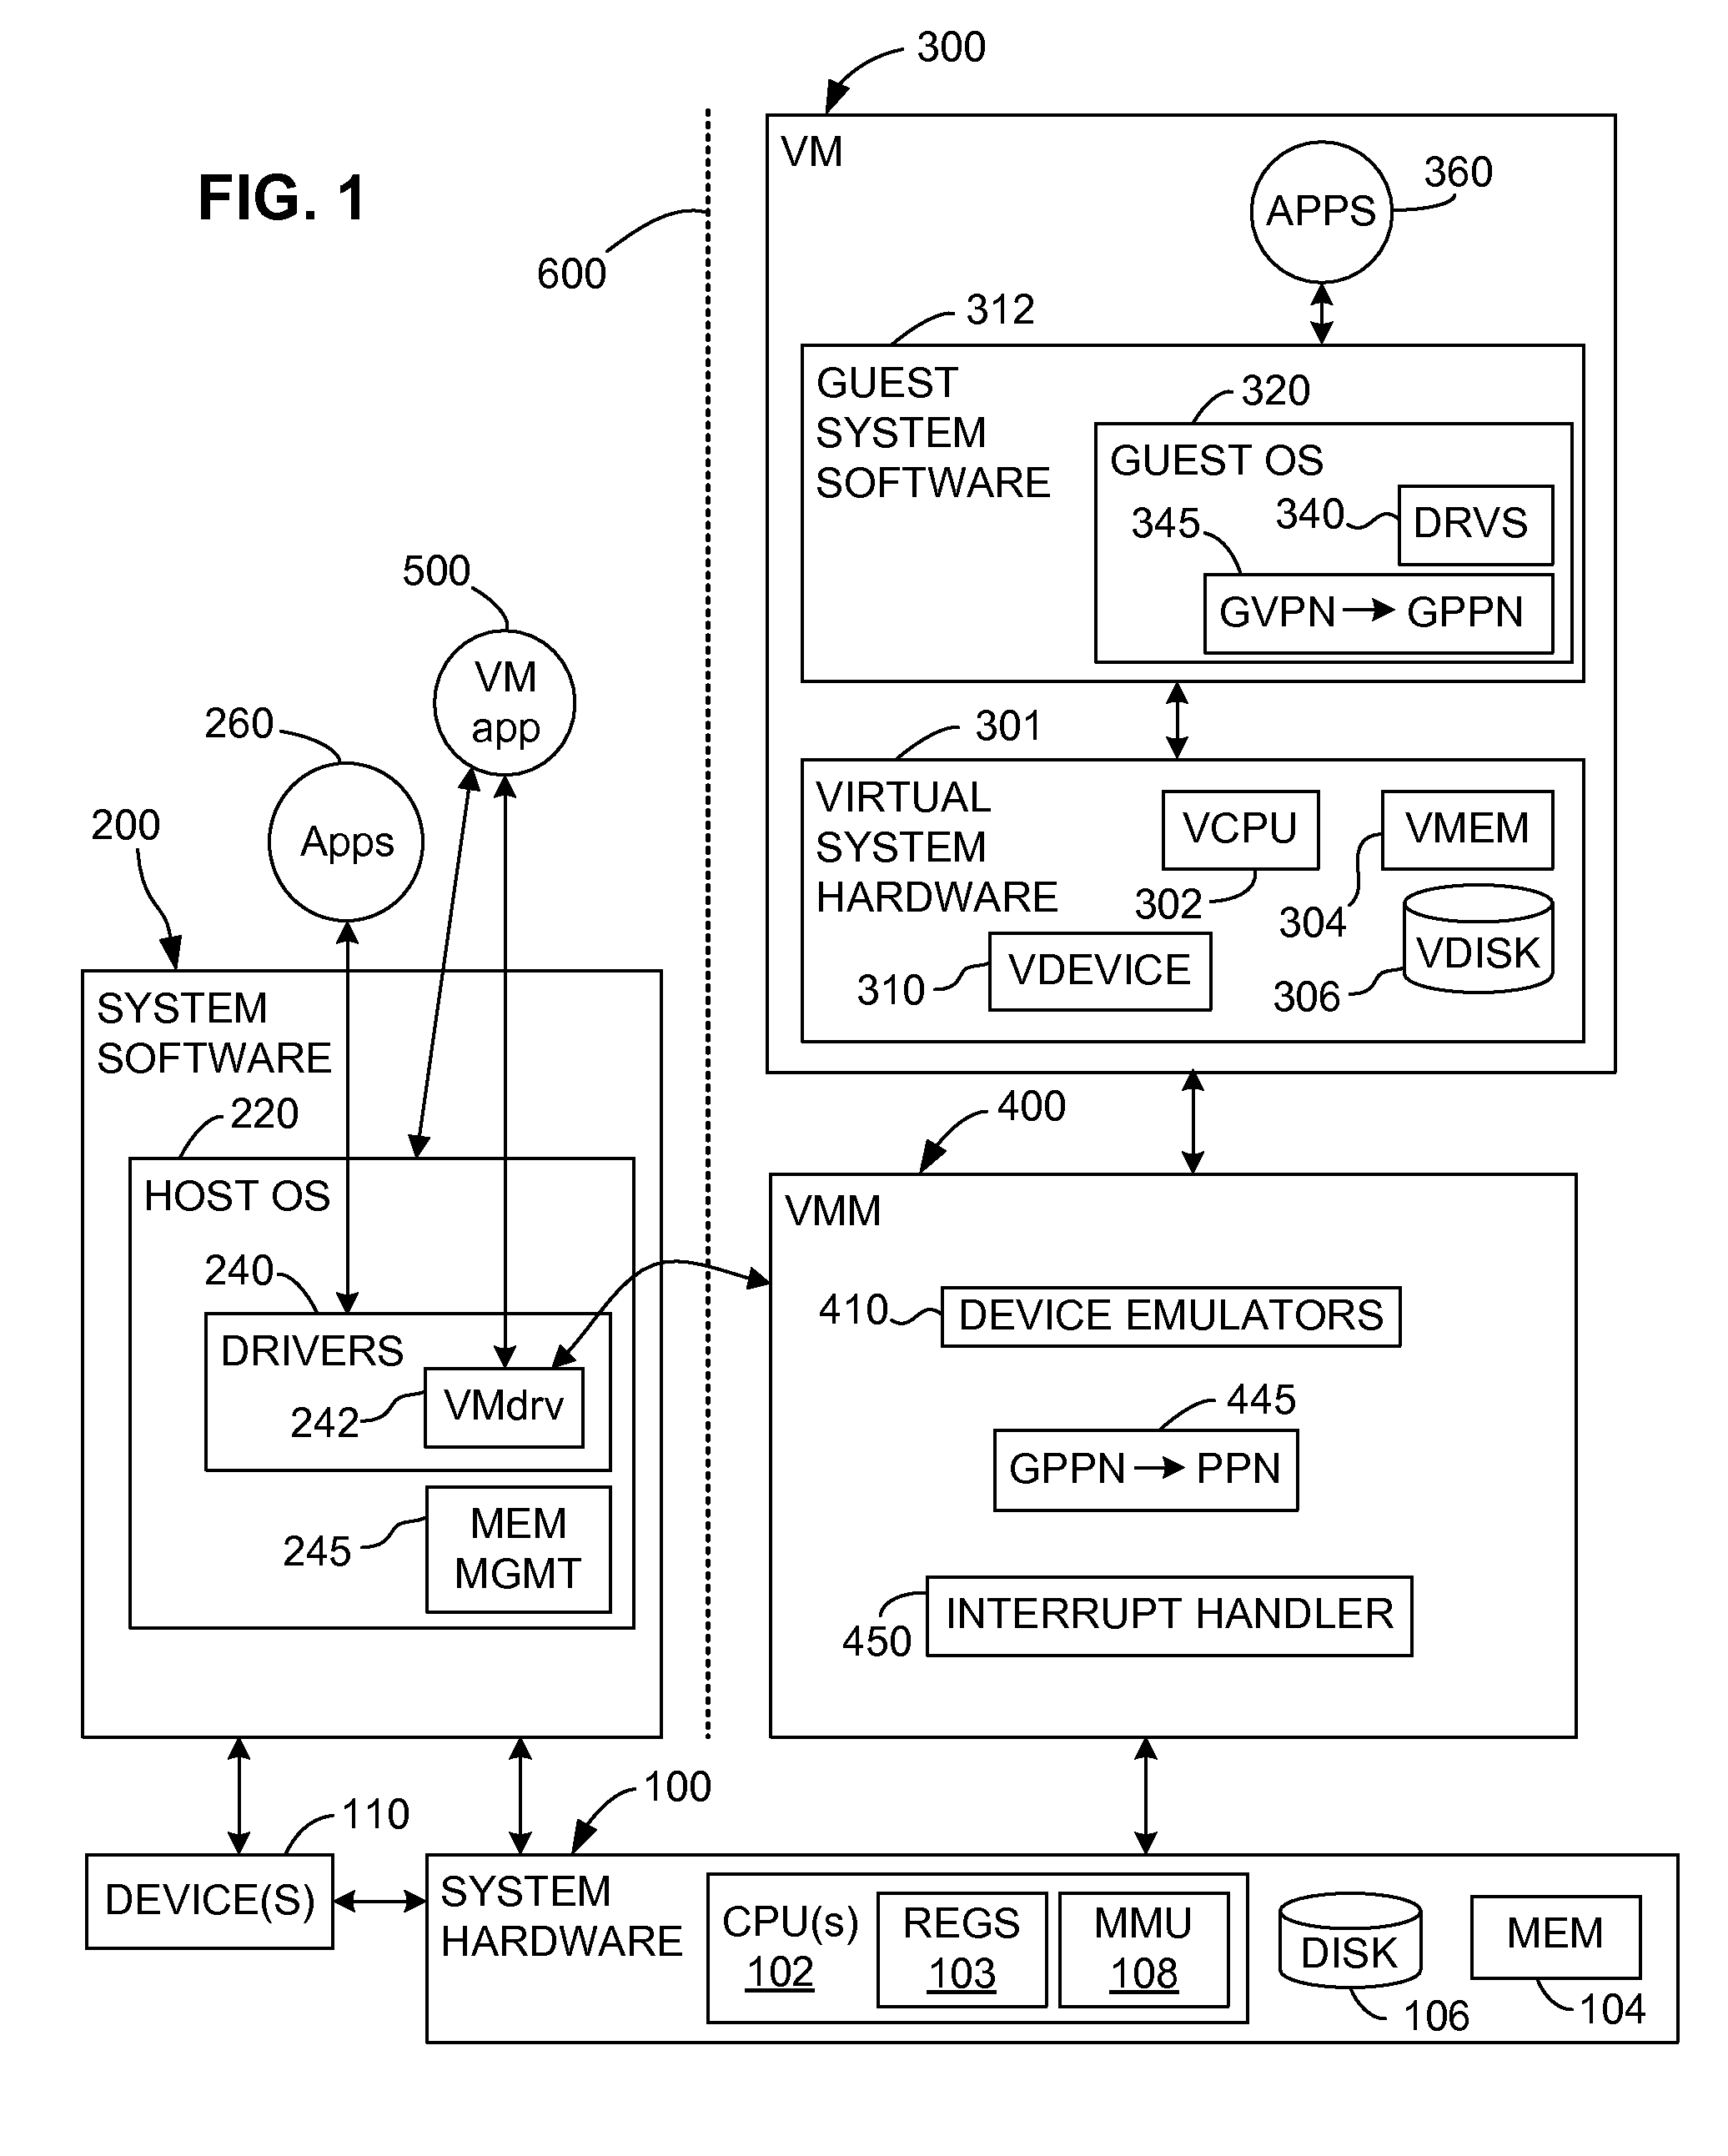 Switching between multiple software entities using different operating modes of a processor